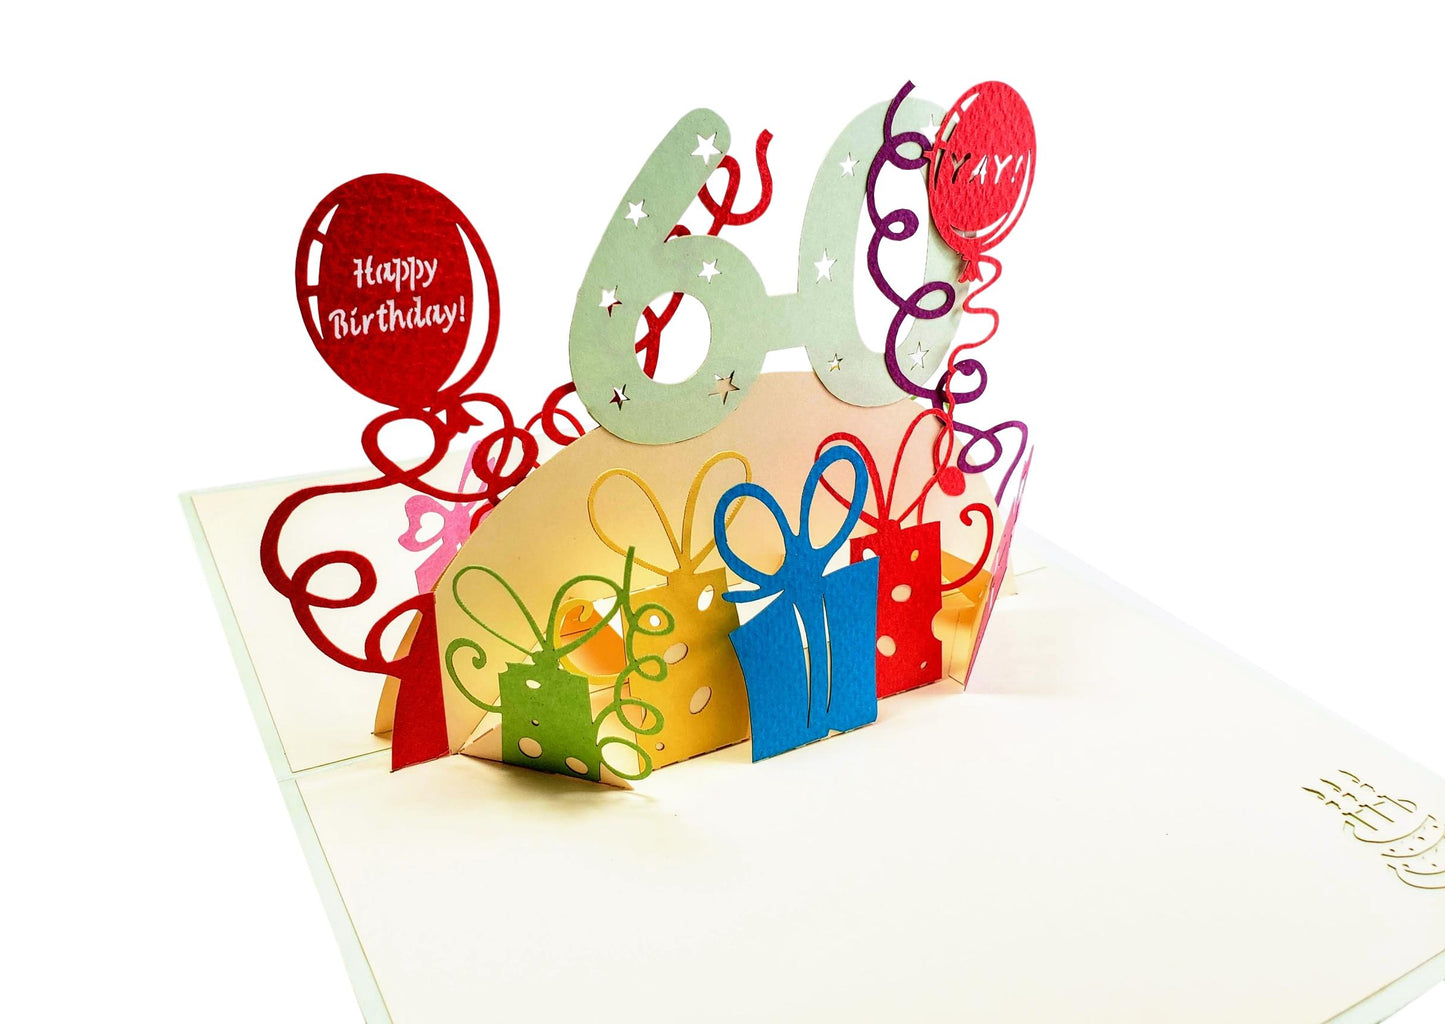 Happy 60th Birthday With Lots of Presents 3D Pop Up Greeting Card - Age - best deal - Birthday - iGifts And Cards